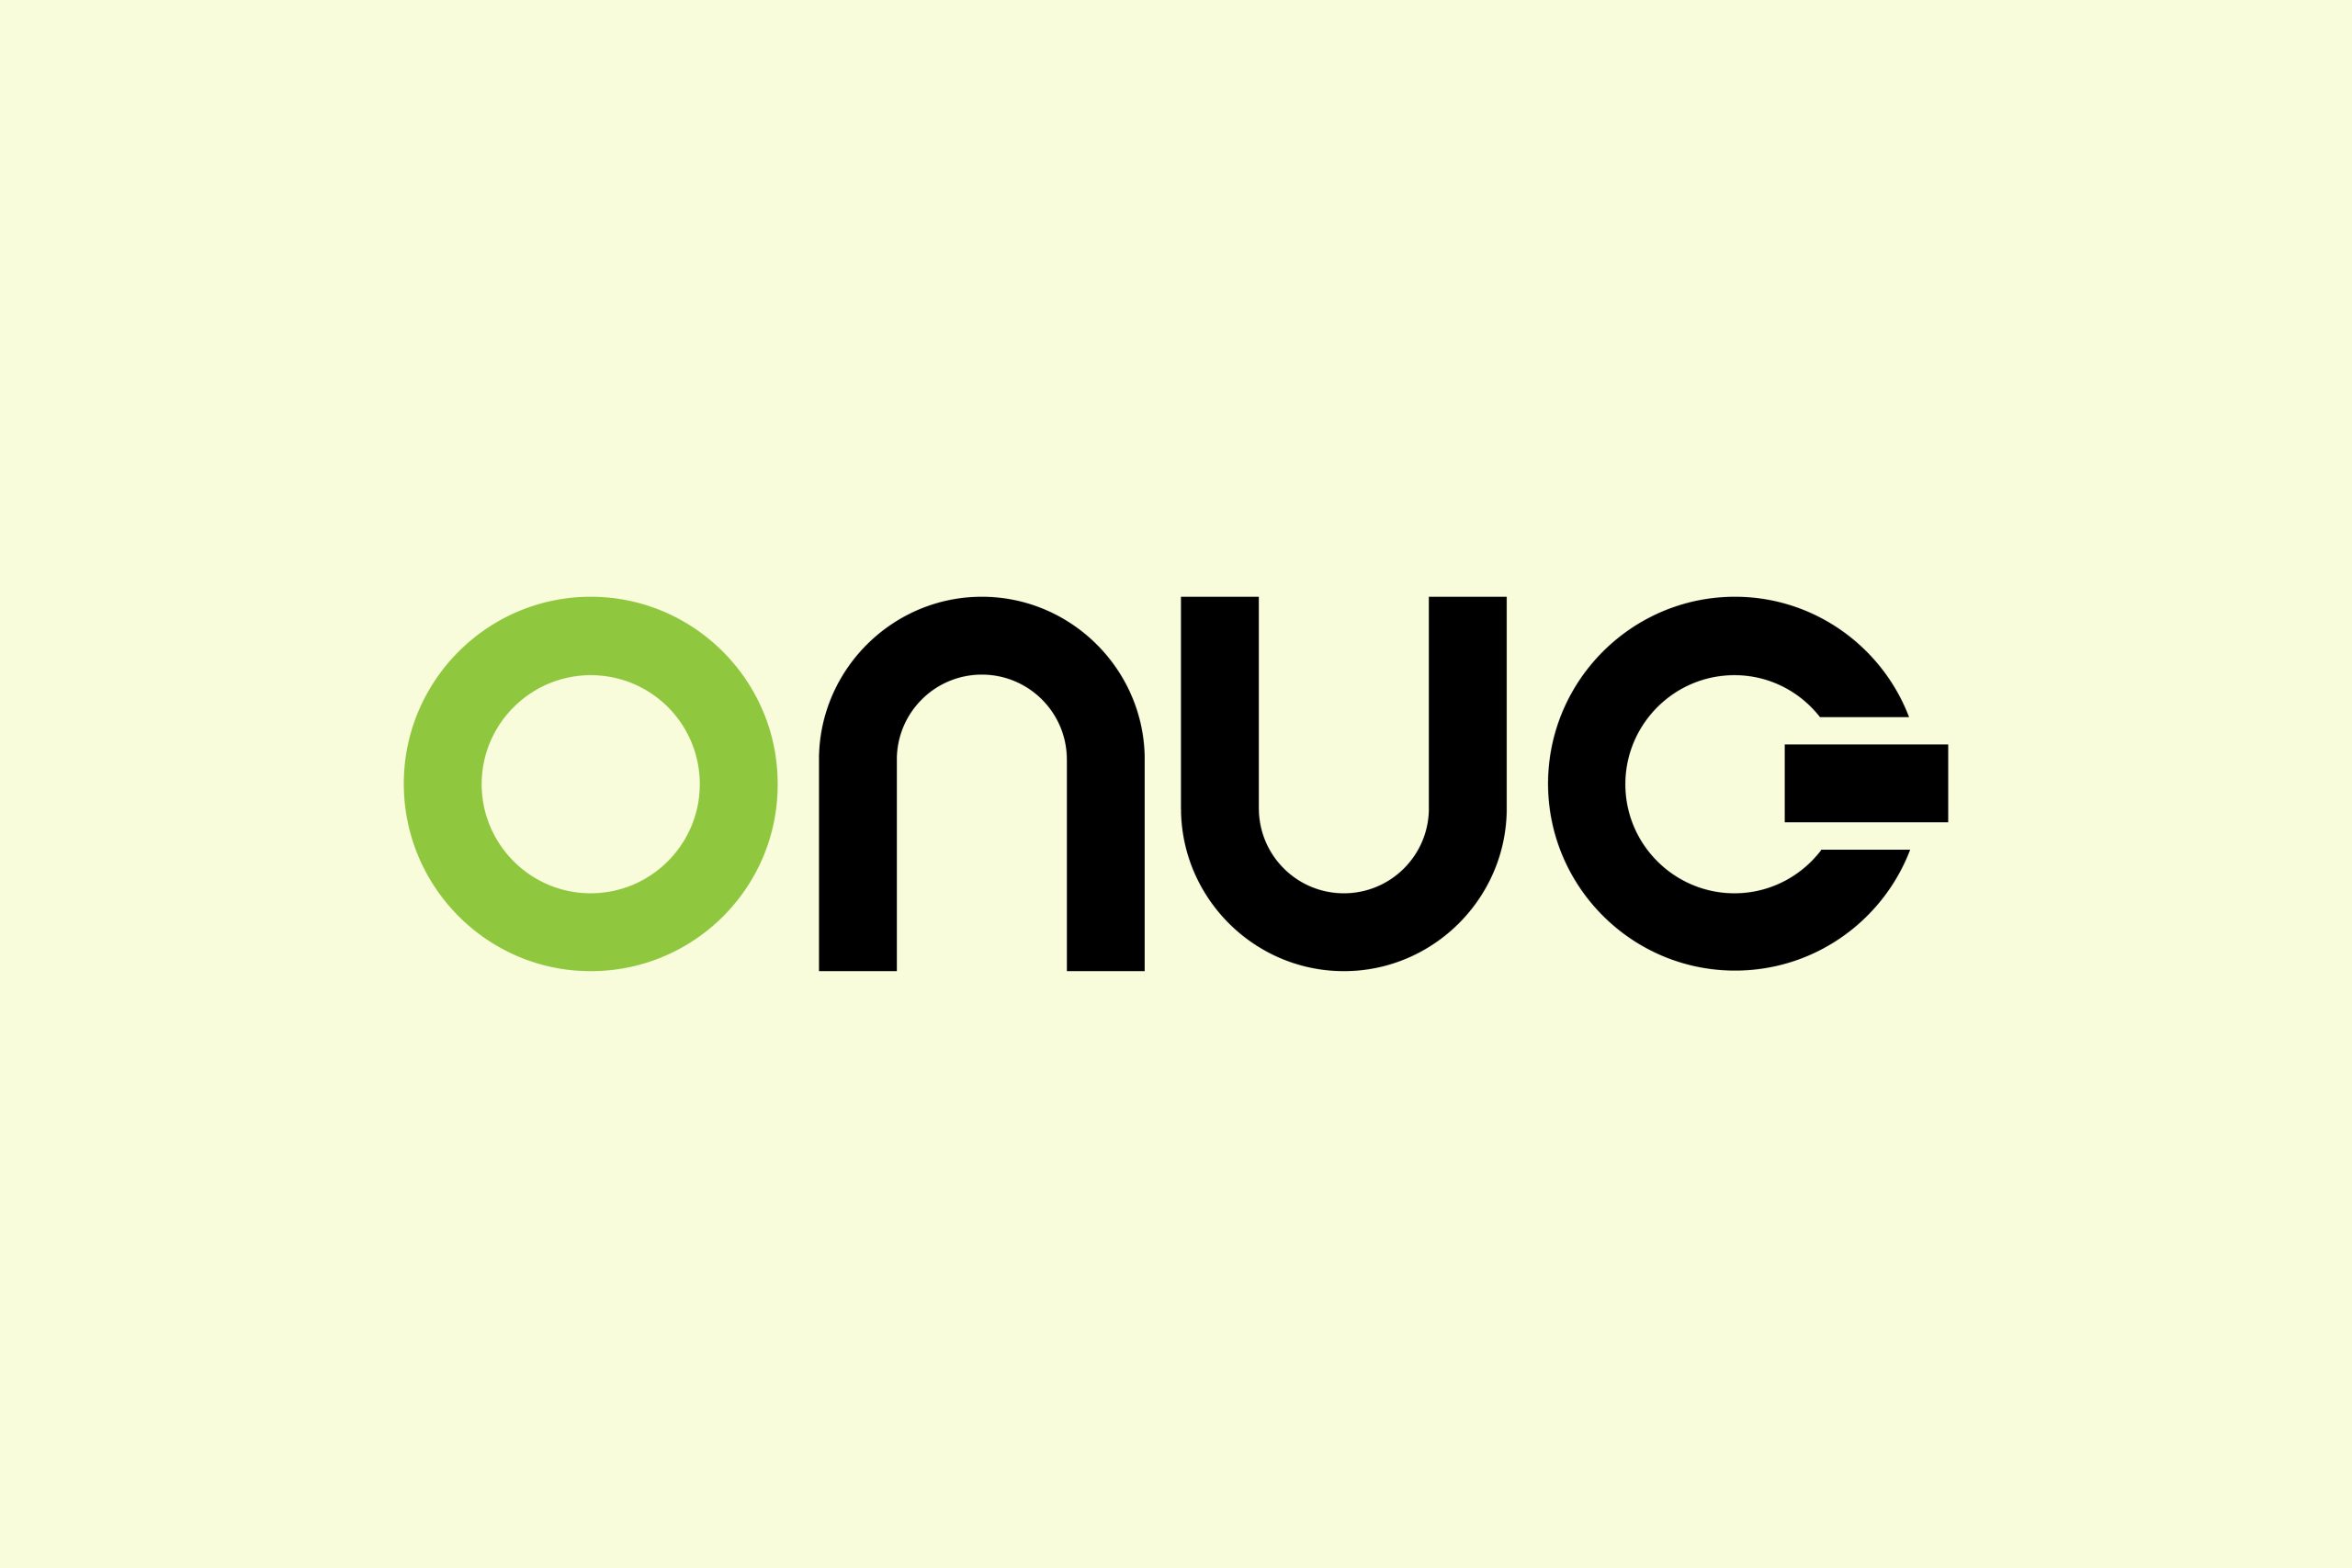 ONUG logo: a stylized design featuring the letters O, N, U, and G, representing the brand identity of ONUG.